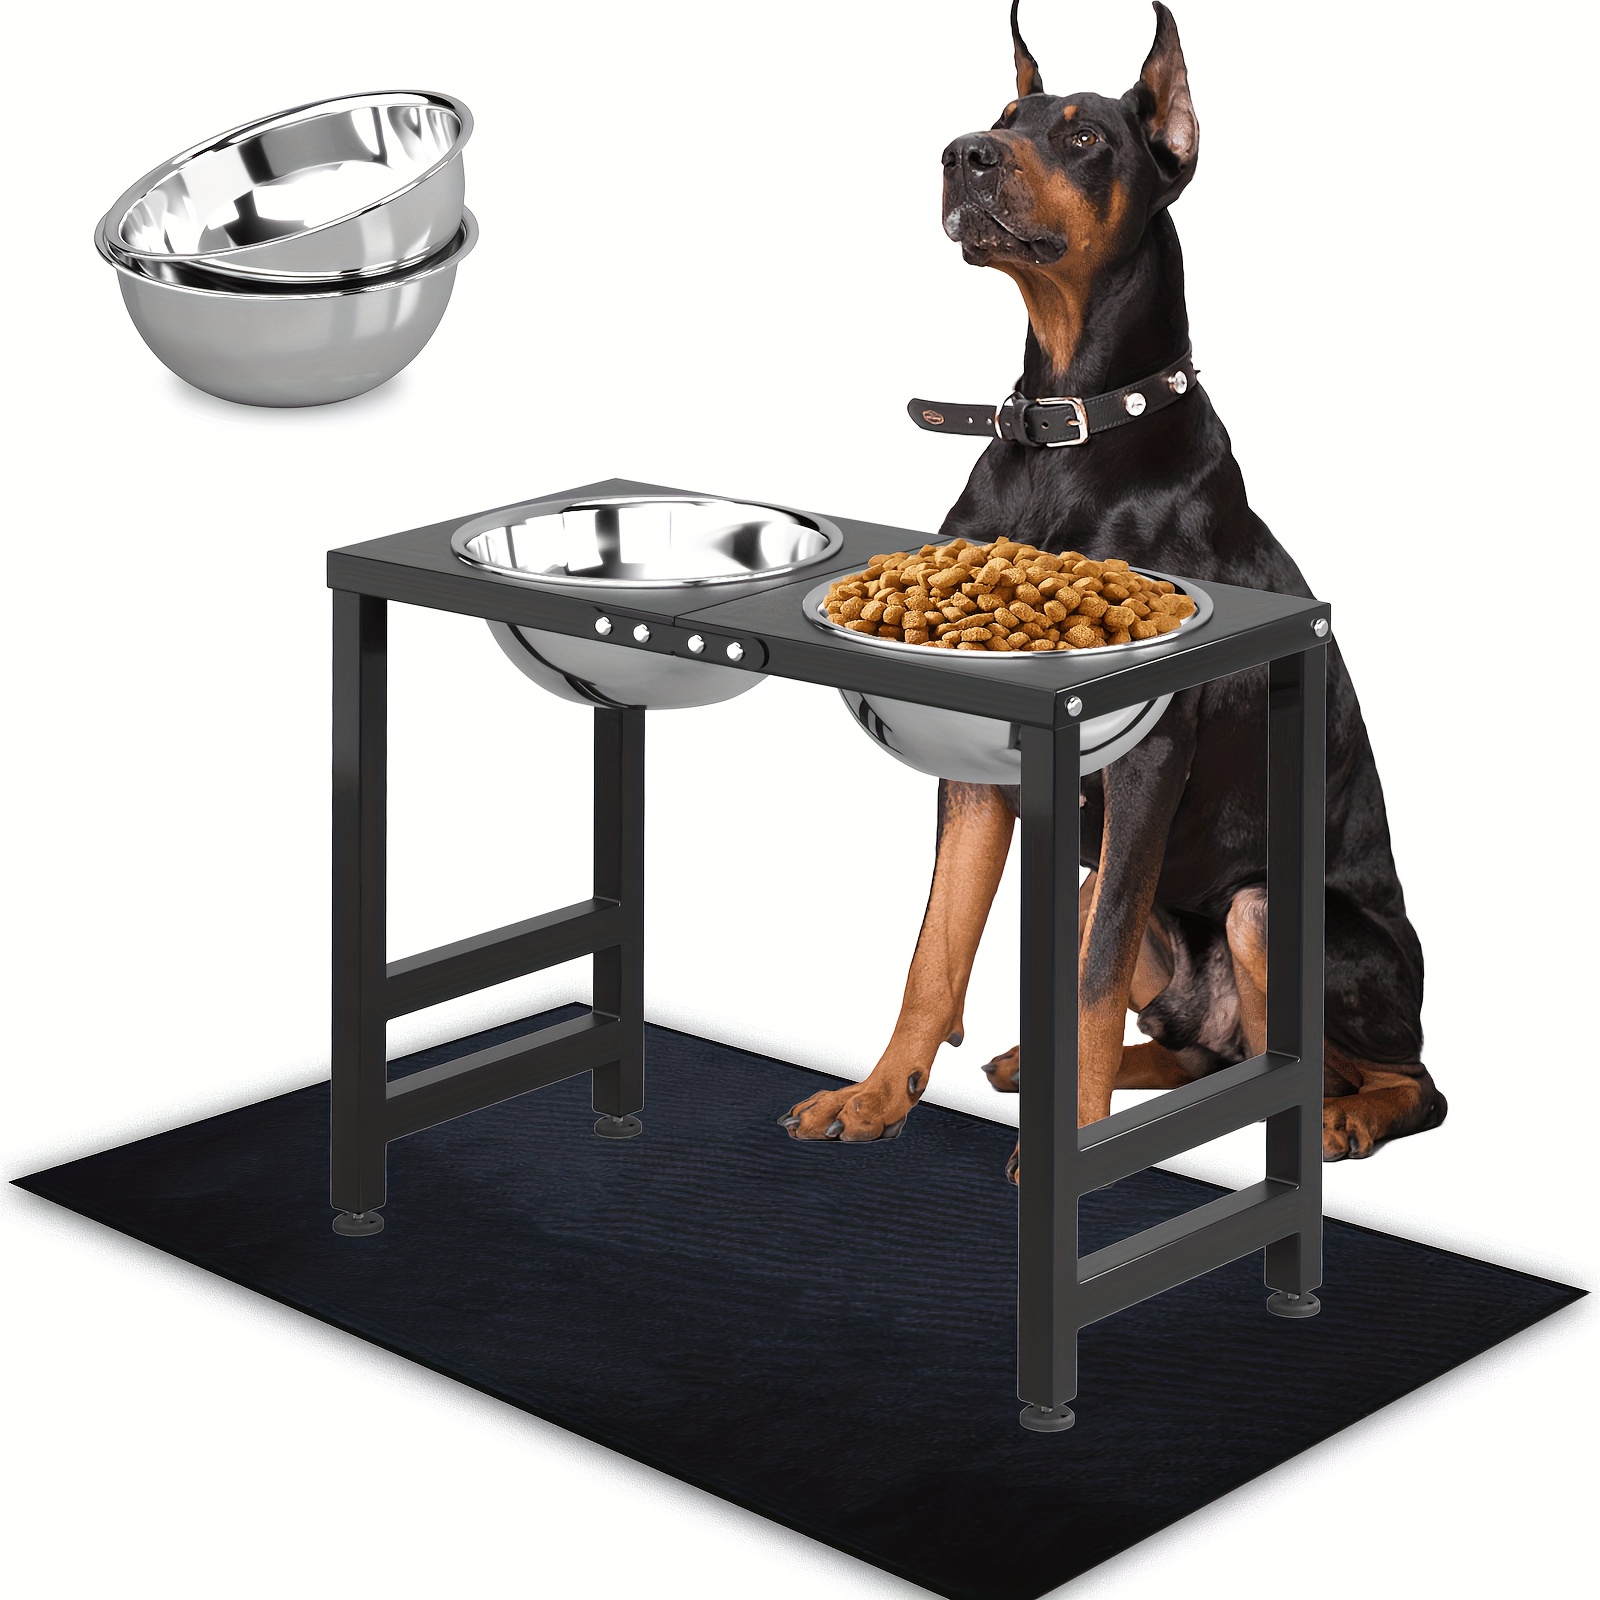 

Extra Large Elevated Dog Bowls For Large Dogs, Metal Raised Dog Bowl Stand With A Soft Mat & 2 3000 Ml Dog Bowls, 17.1 In/43.5 Cm Tall Dog Food Water Feeder For Extra Large Breed